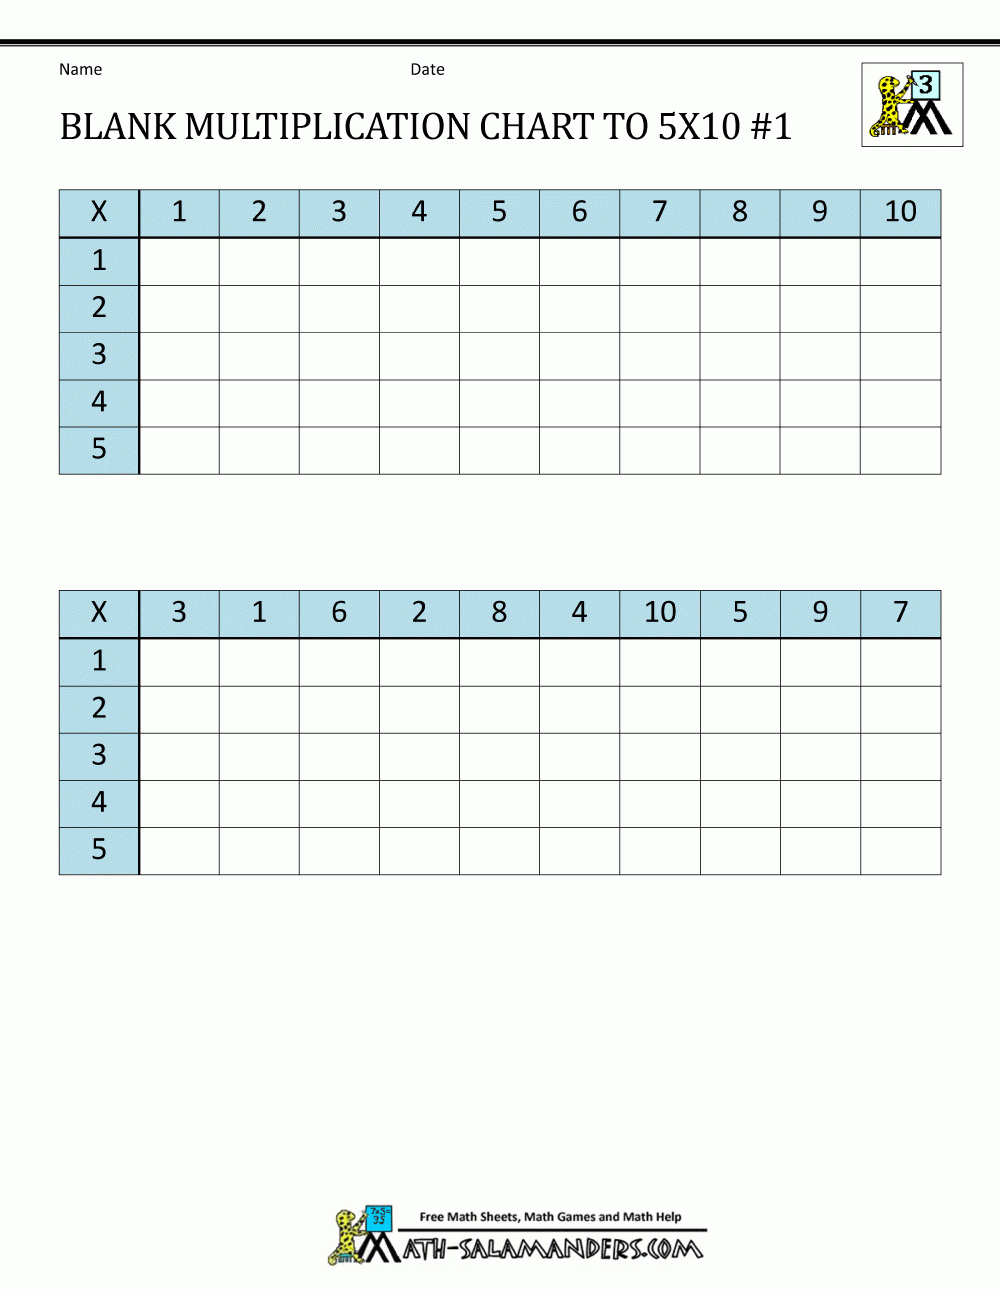 Blank Multiplication Chart Up To 10X10 for Printable Multiplication Practice Chart